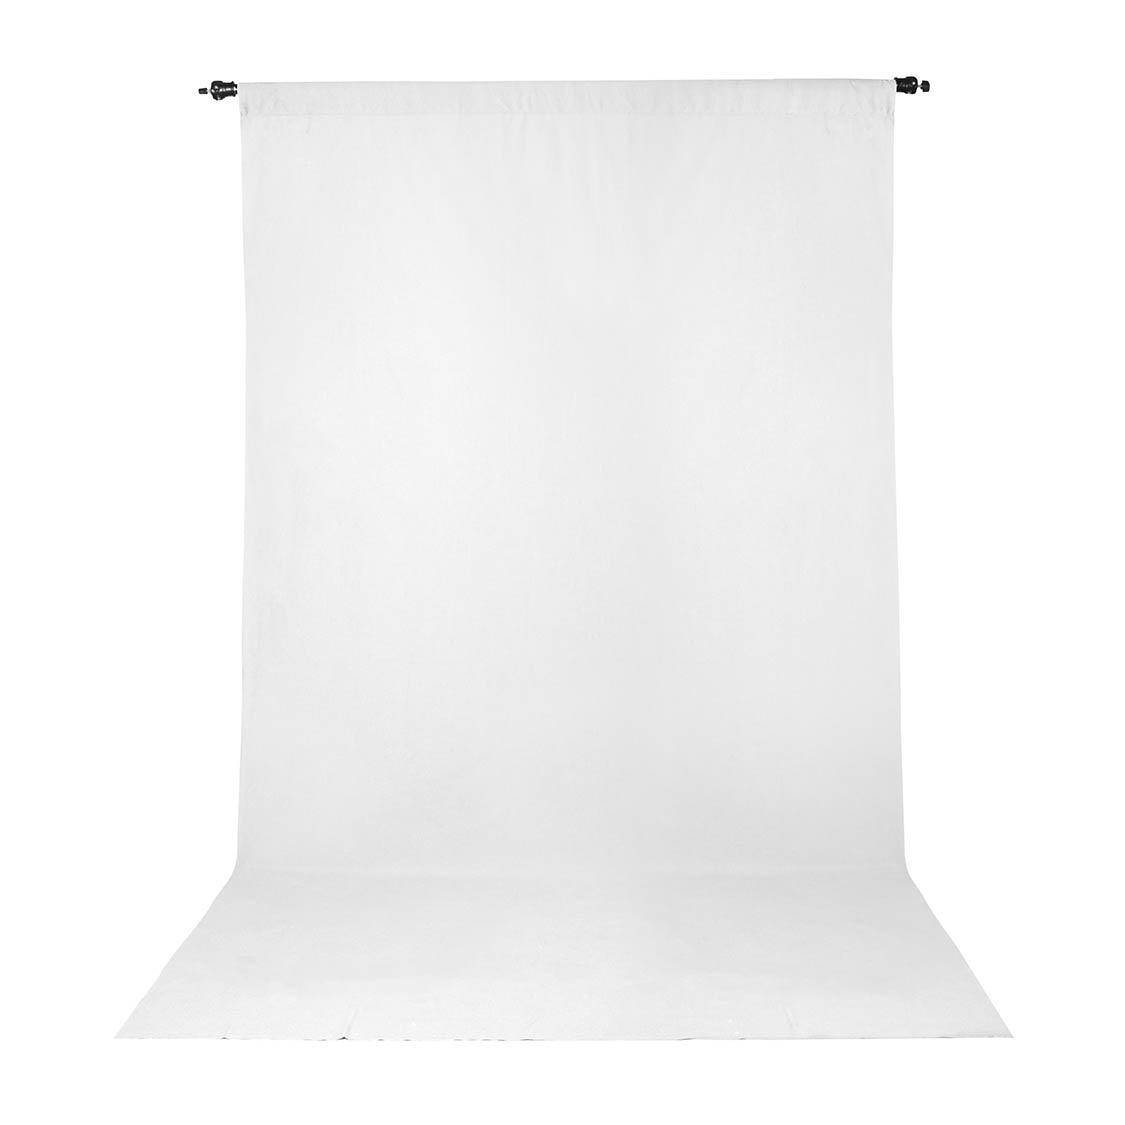 Promaster 10x20 ft White Wrinkle Resistant Back Drop